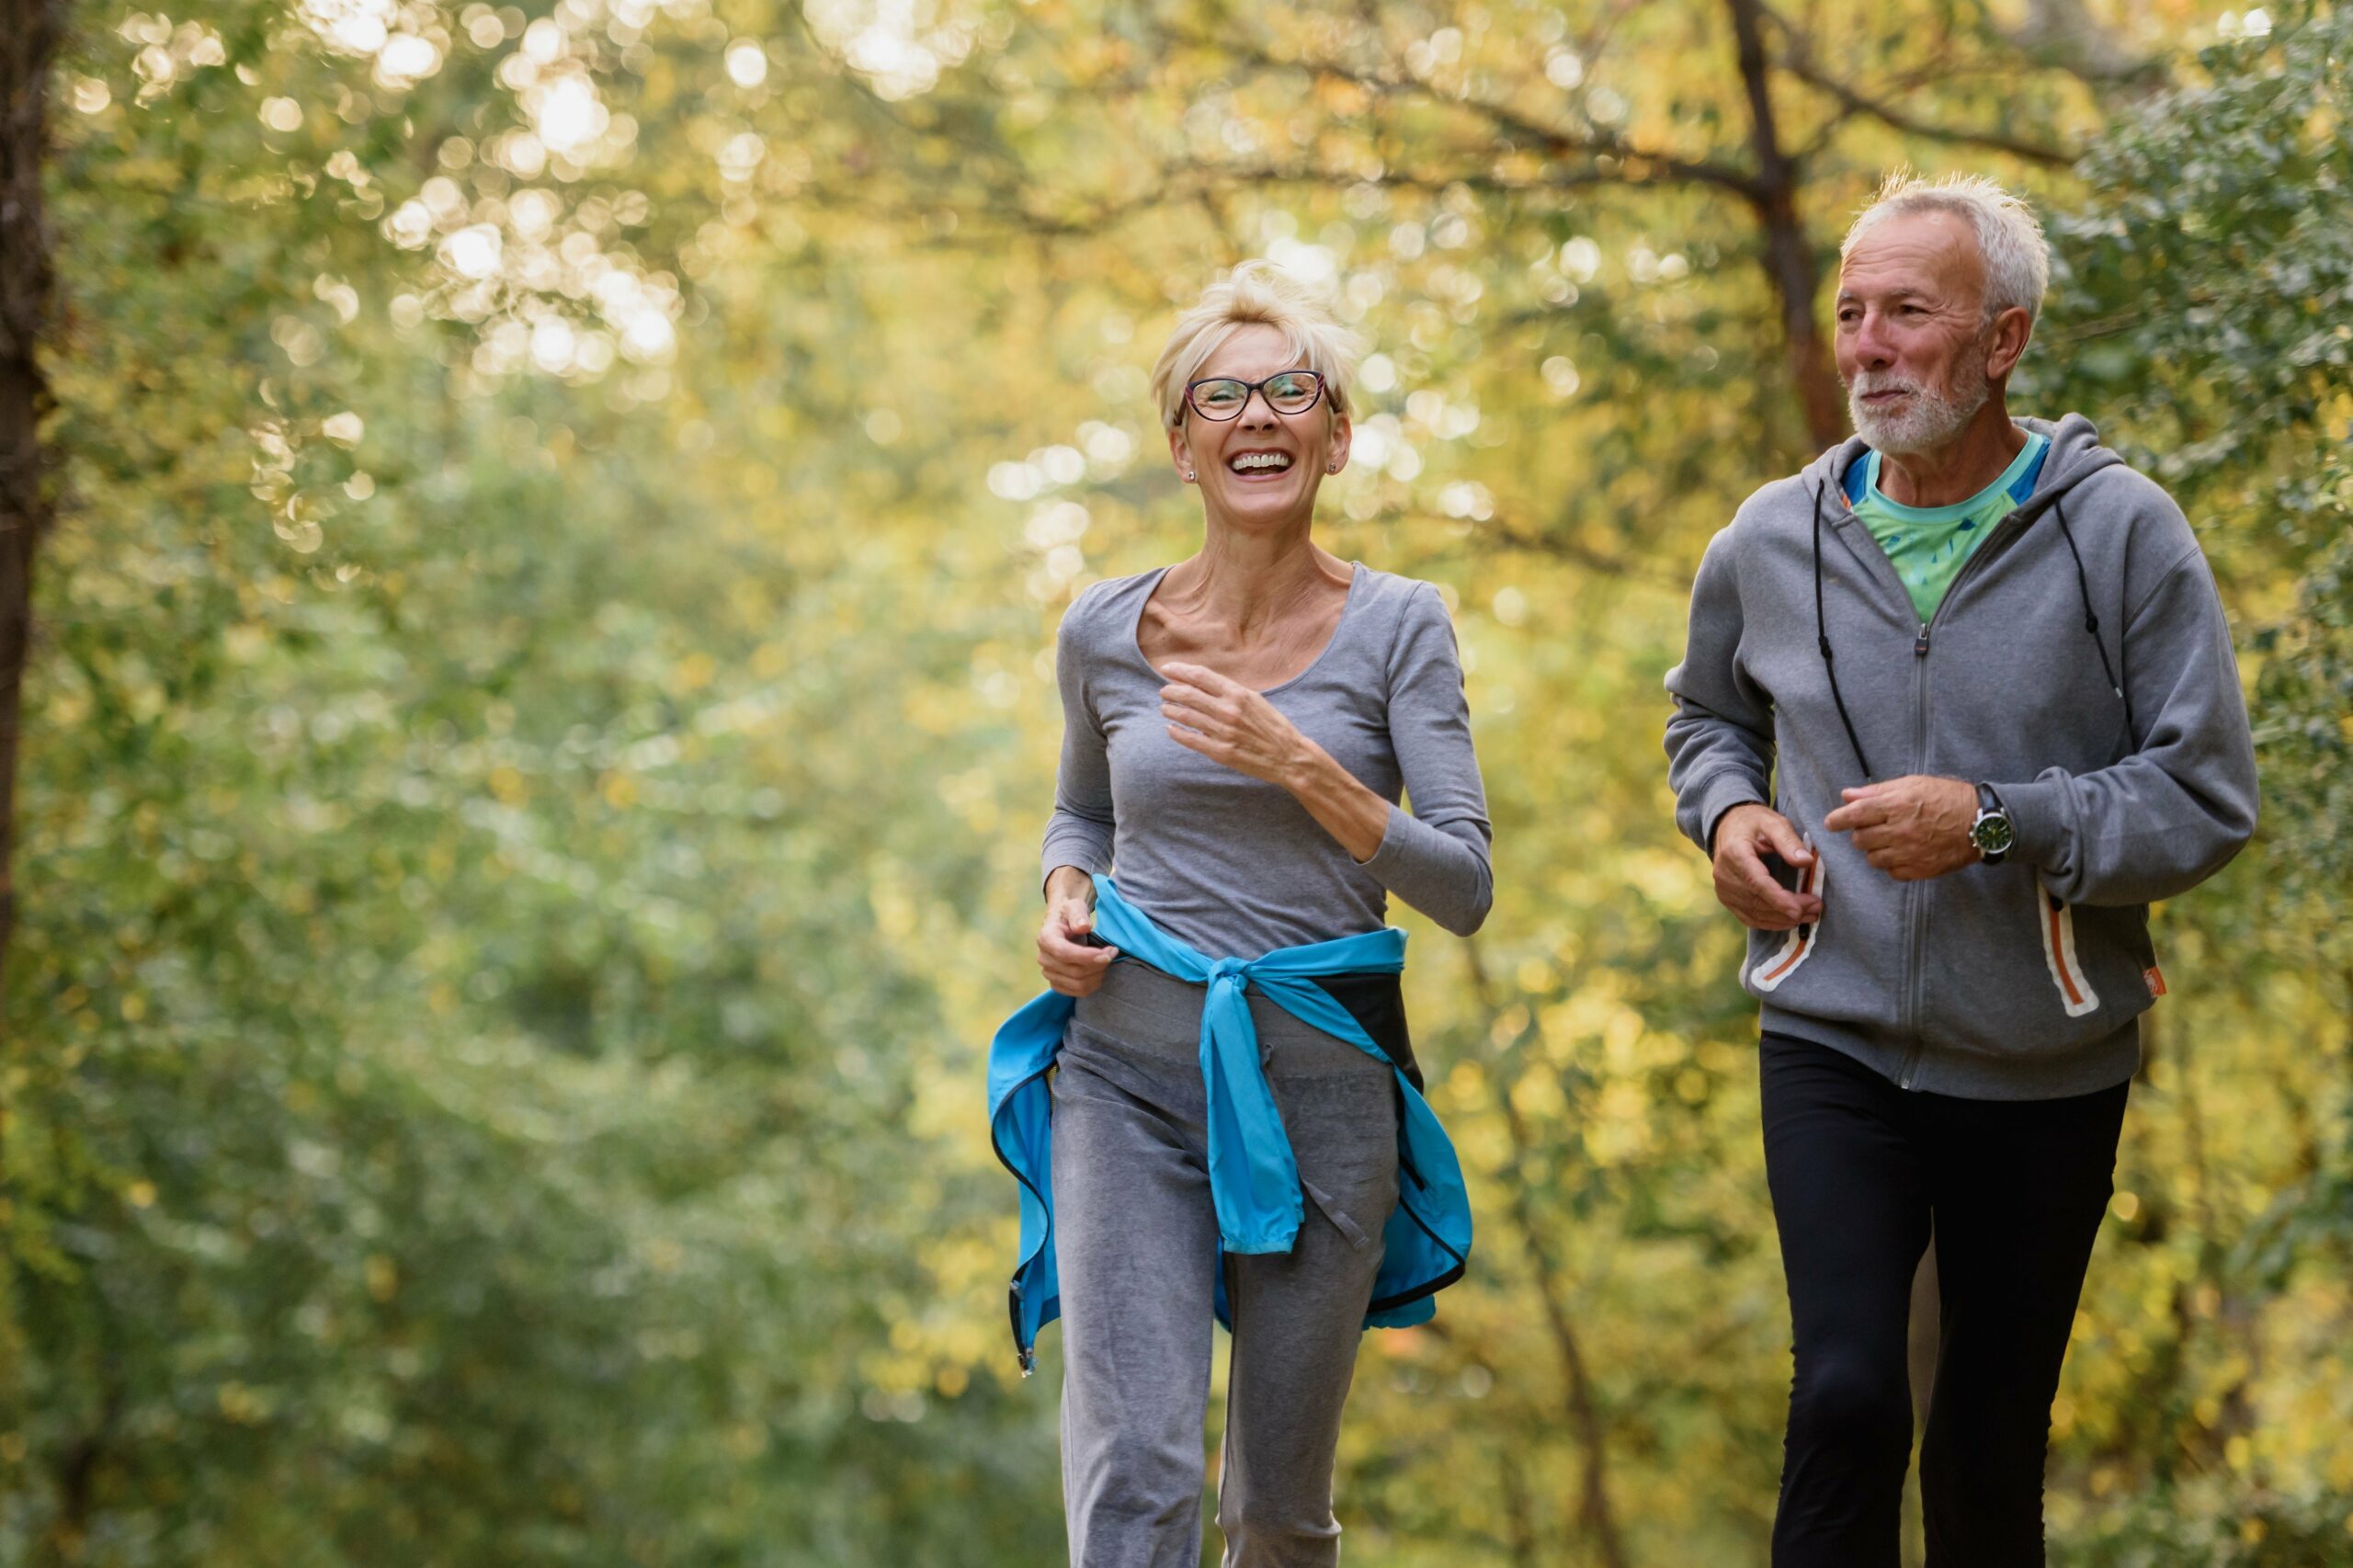 Cheerful Active Senior Couple Jogging In The Park.